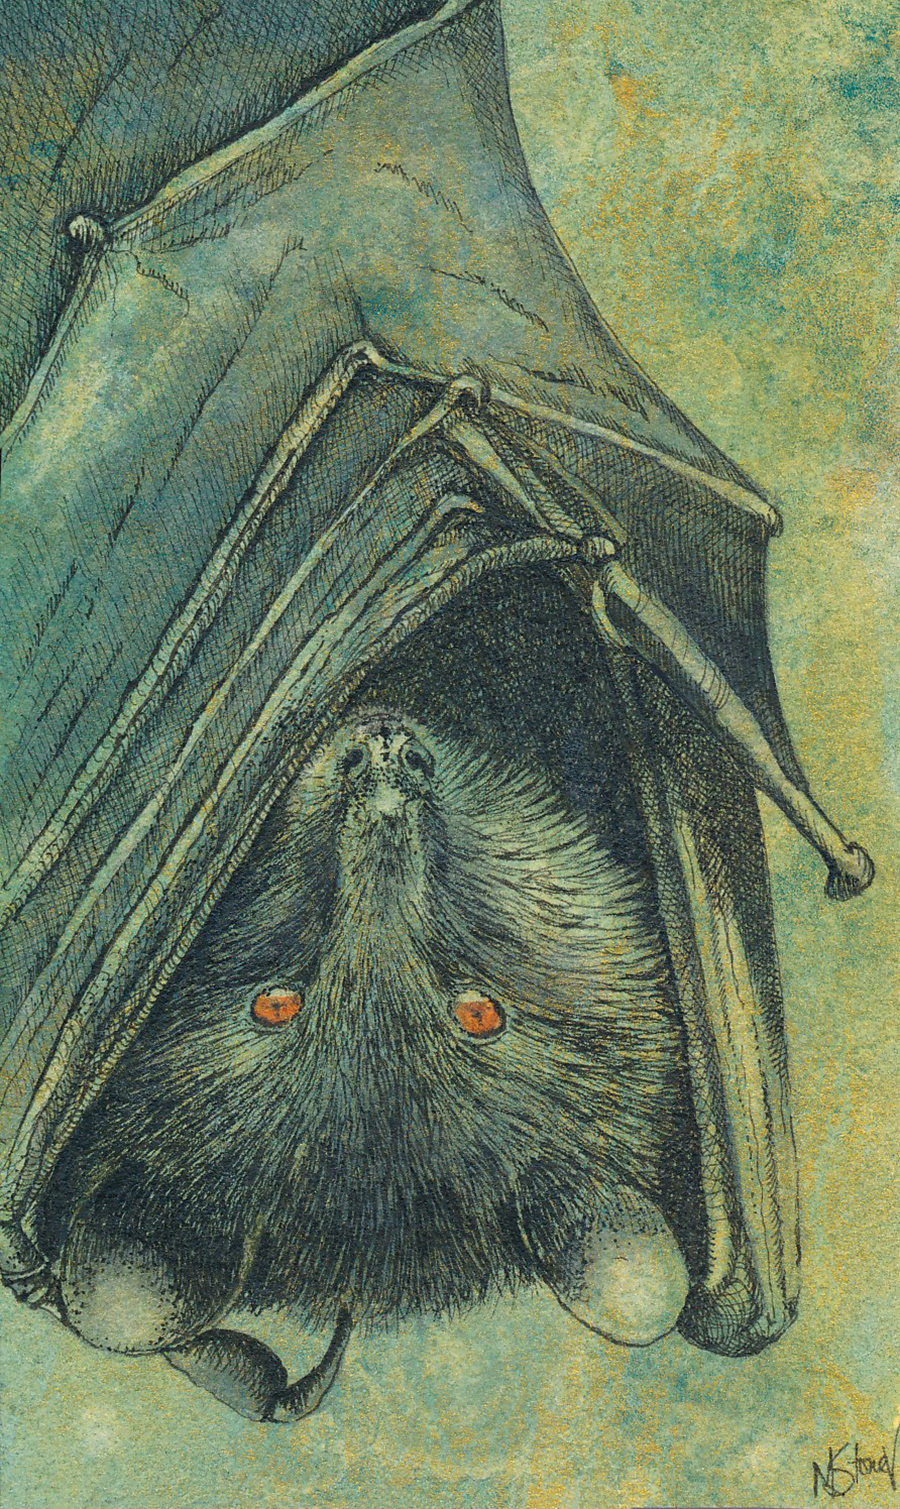 The Bat, 3 x 5 inches, watercolor and ink